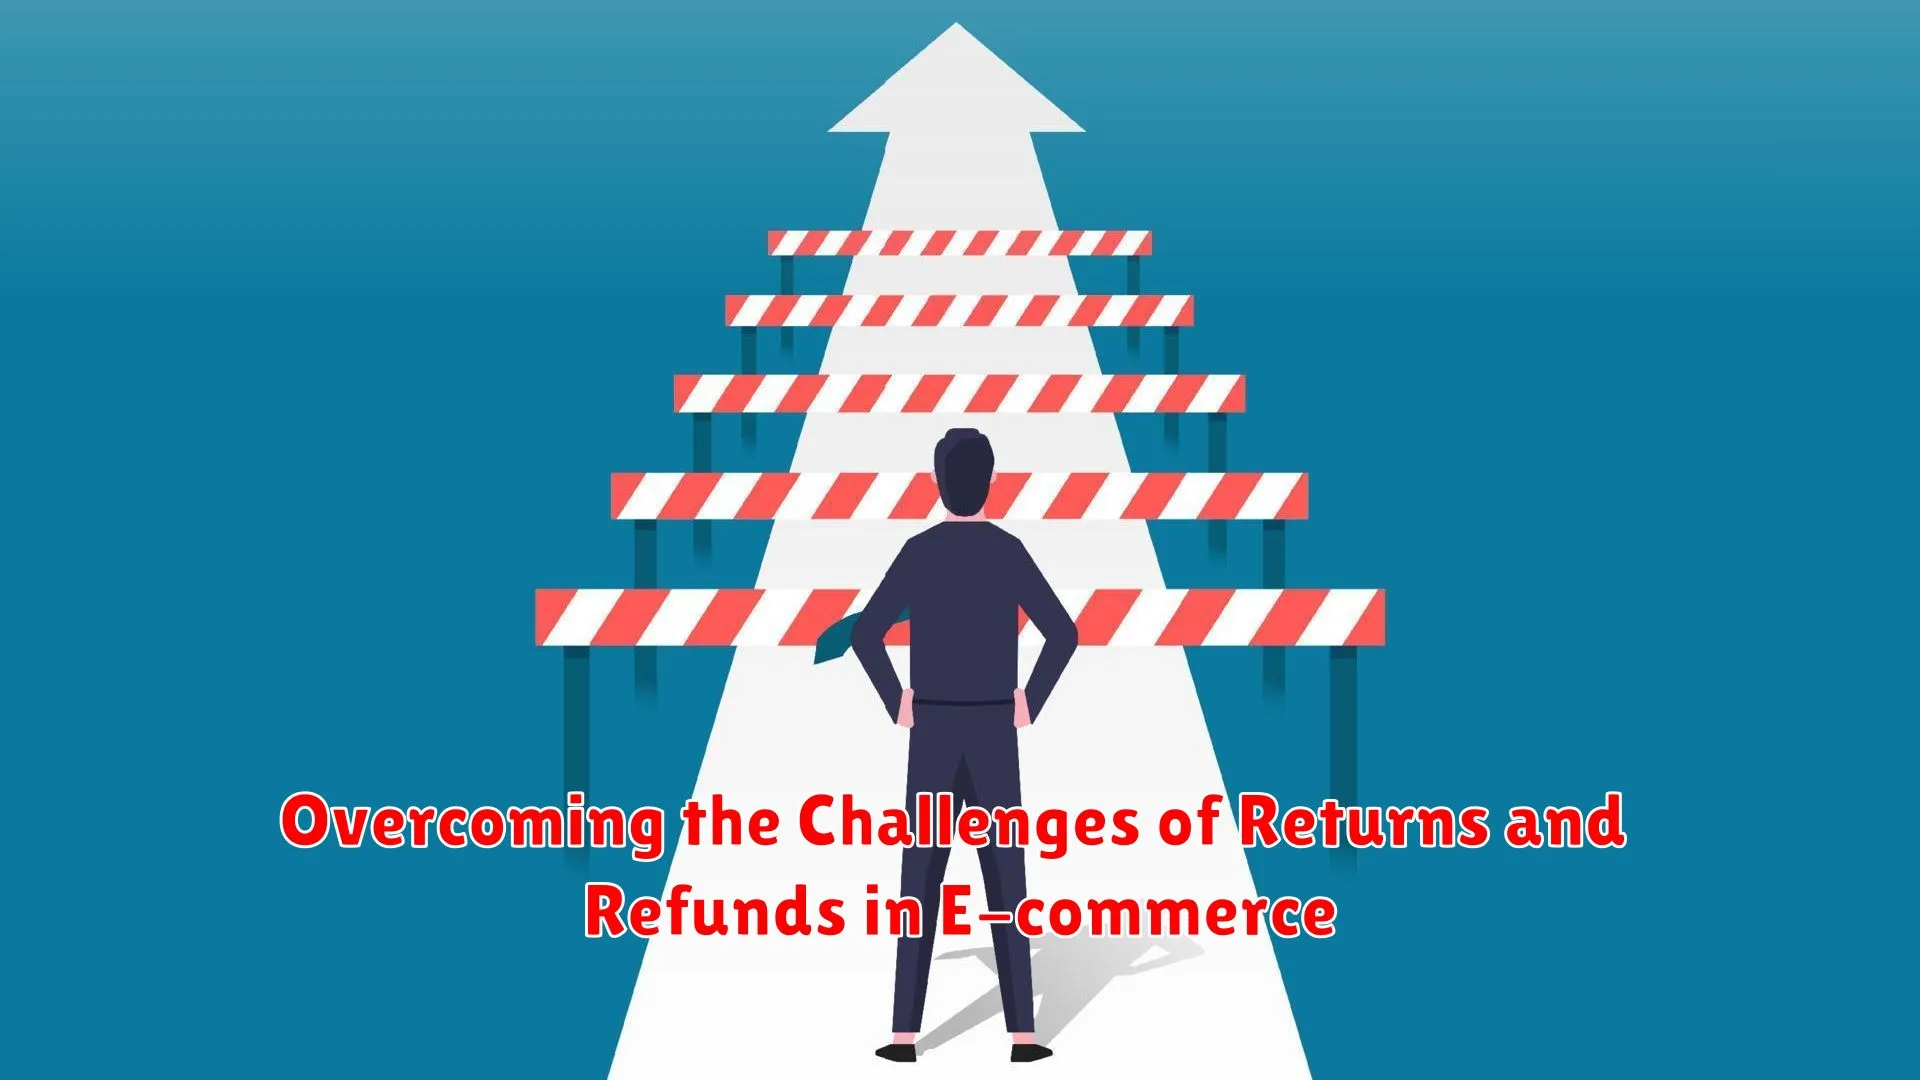 Overcoming the Challenges of Returns and Refunds in E-commerce